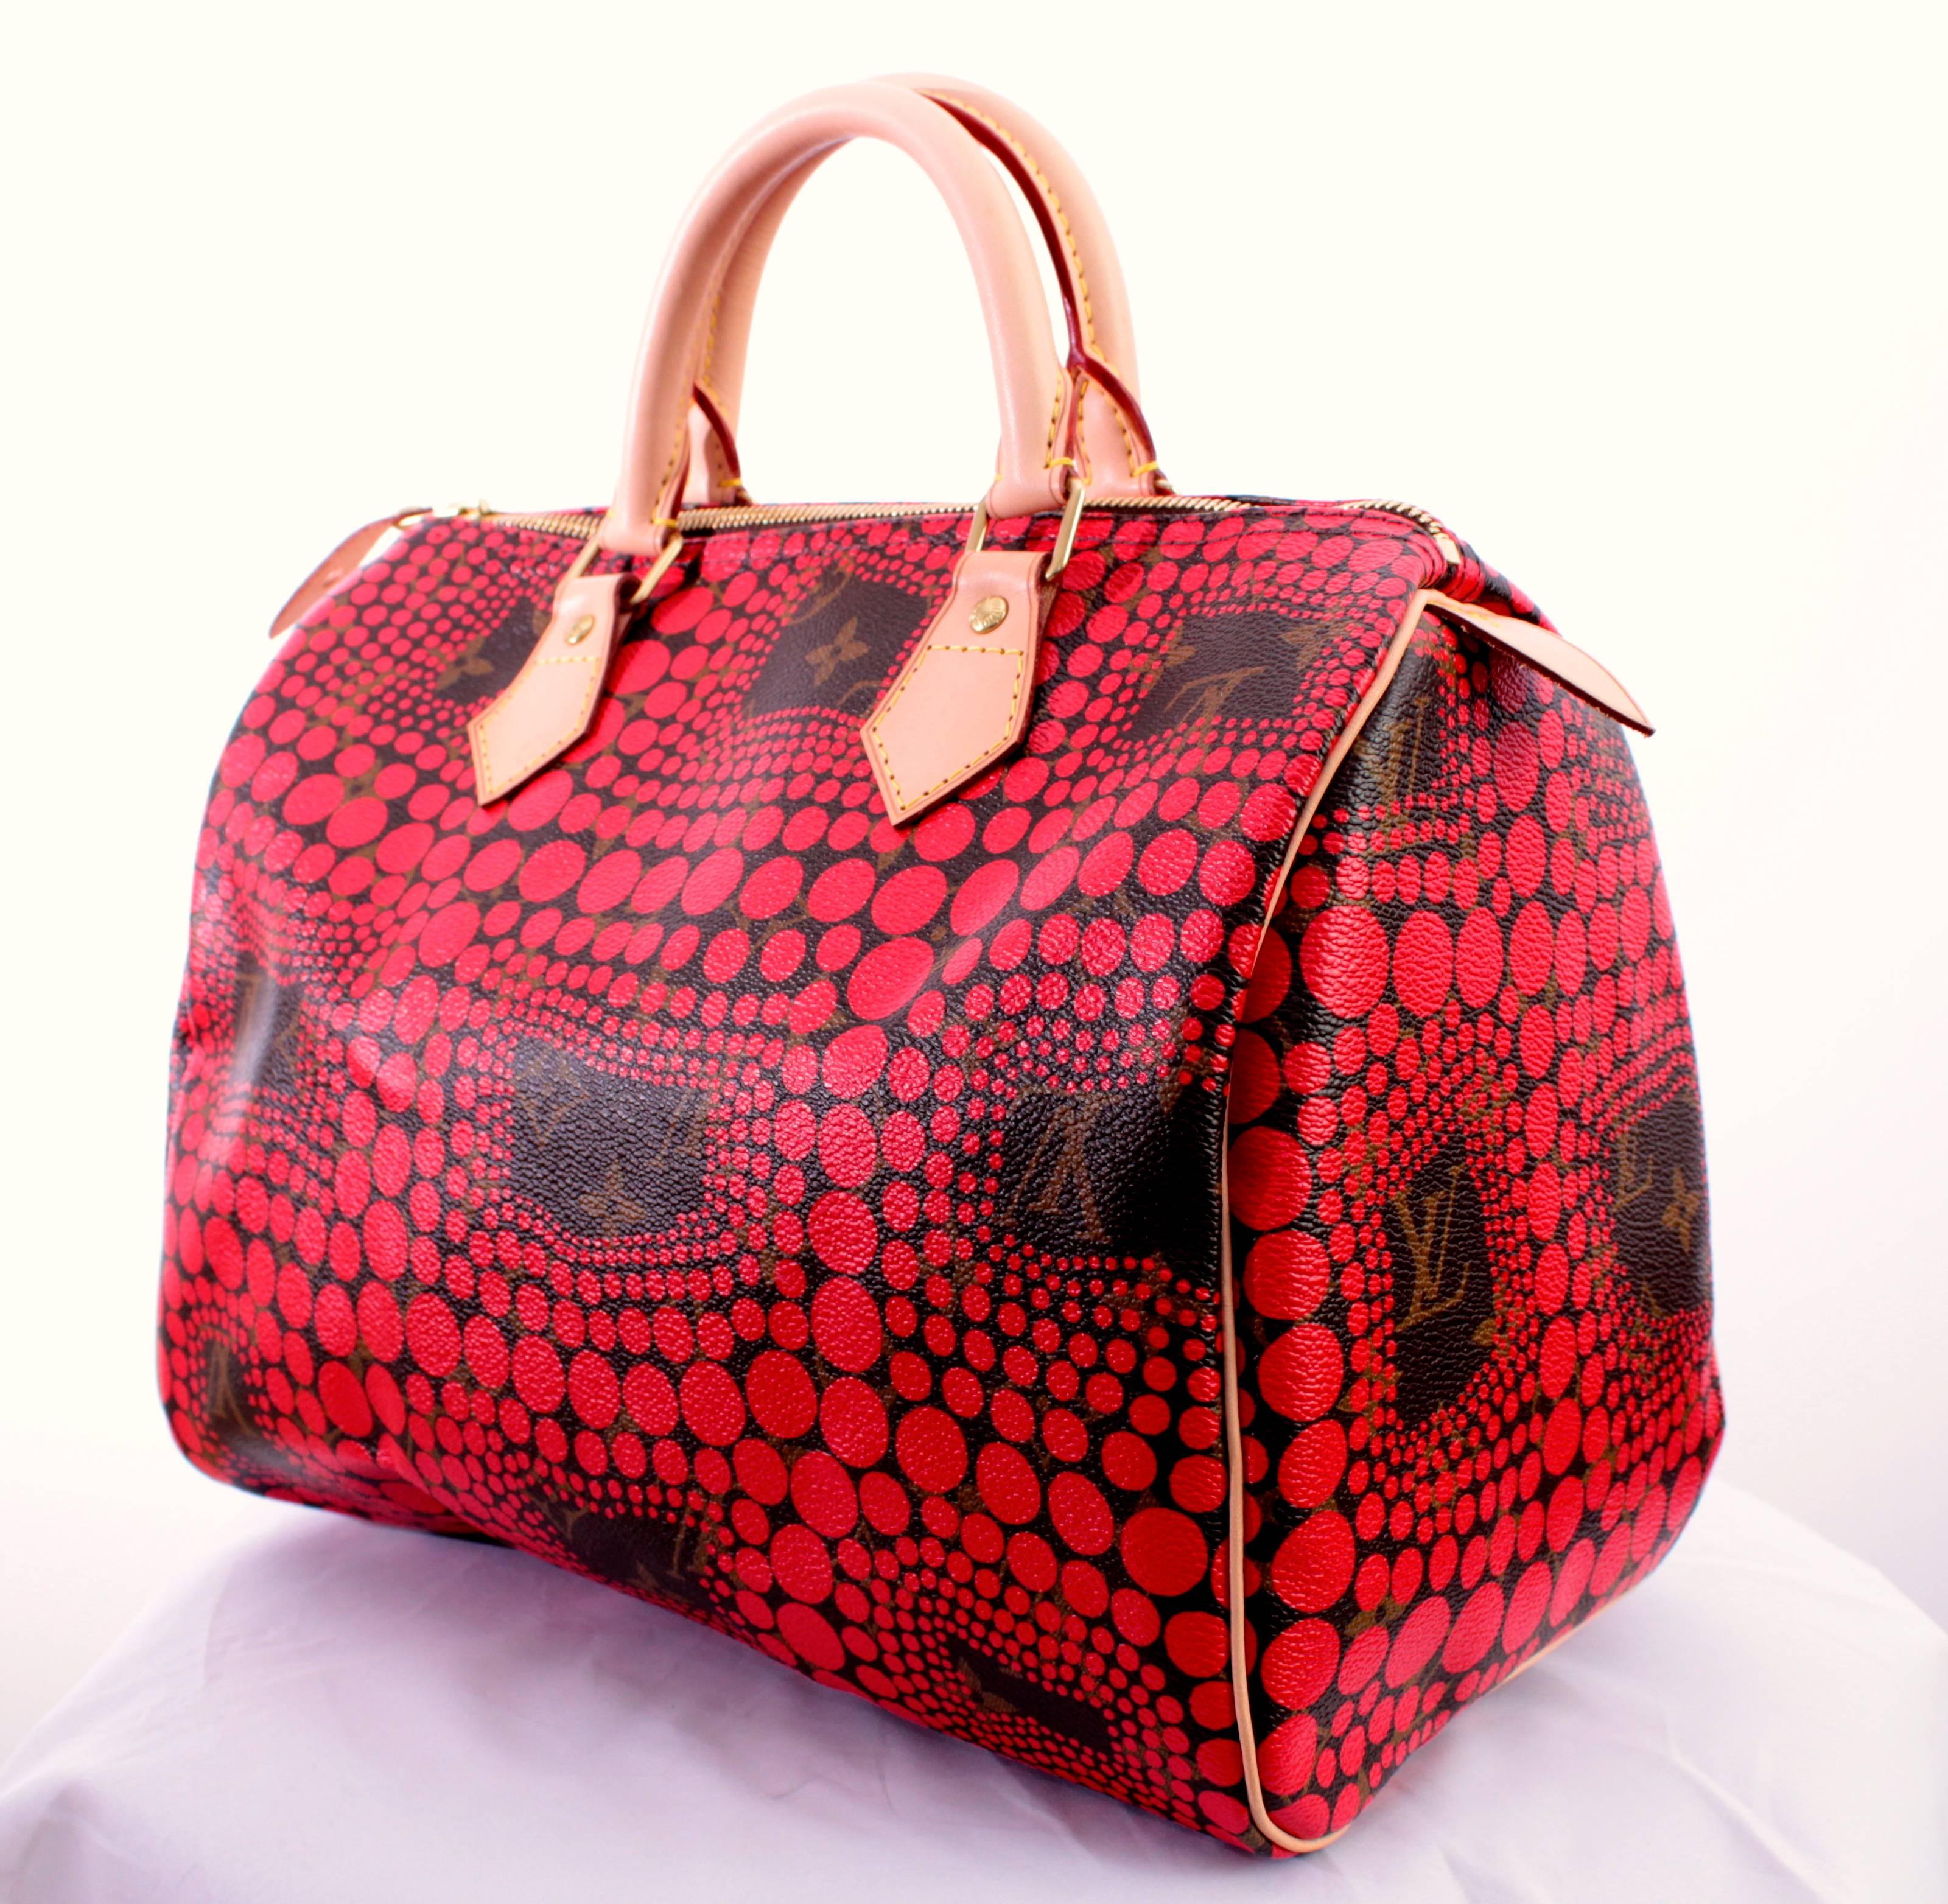 This lovely bag was designed by Yayoi Kusama as a limited edition in collaboration with Louis Vuitton.  In excellent preowned condition, this bag was carried for about two hours during a photo shoot, with the only thing keeping us from calling it